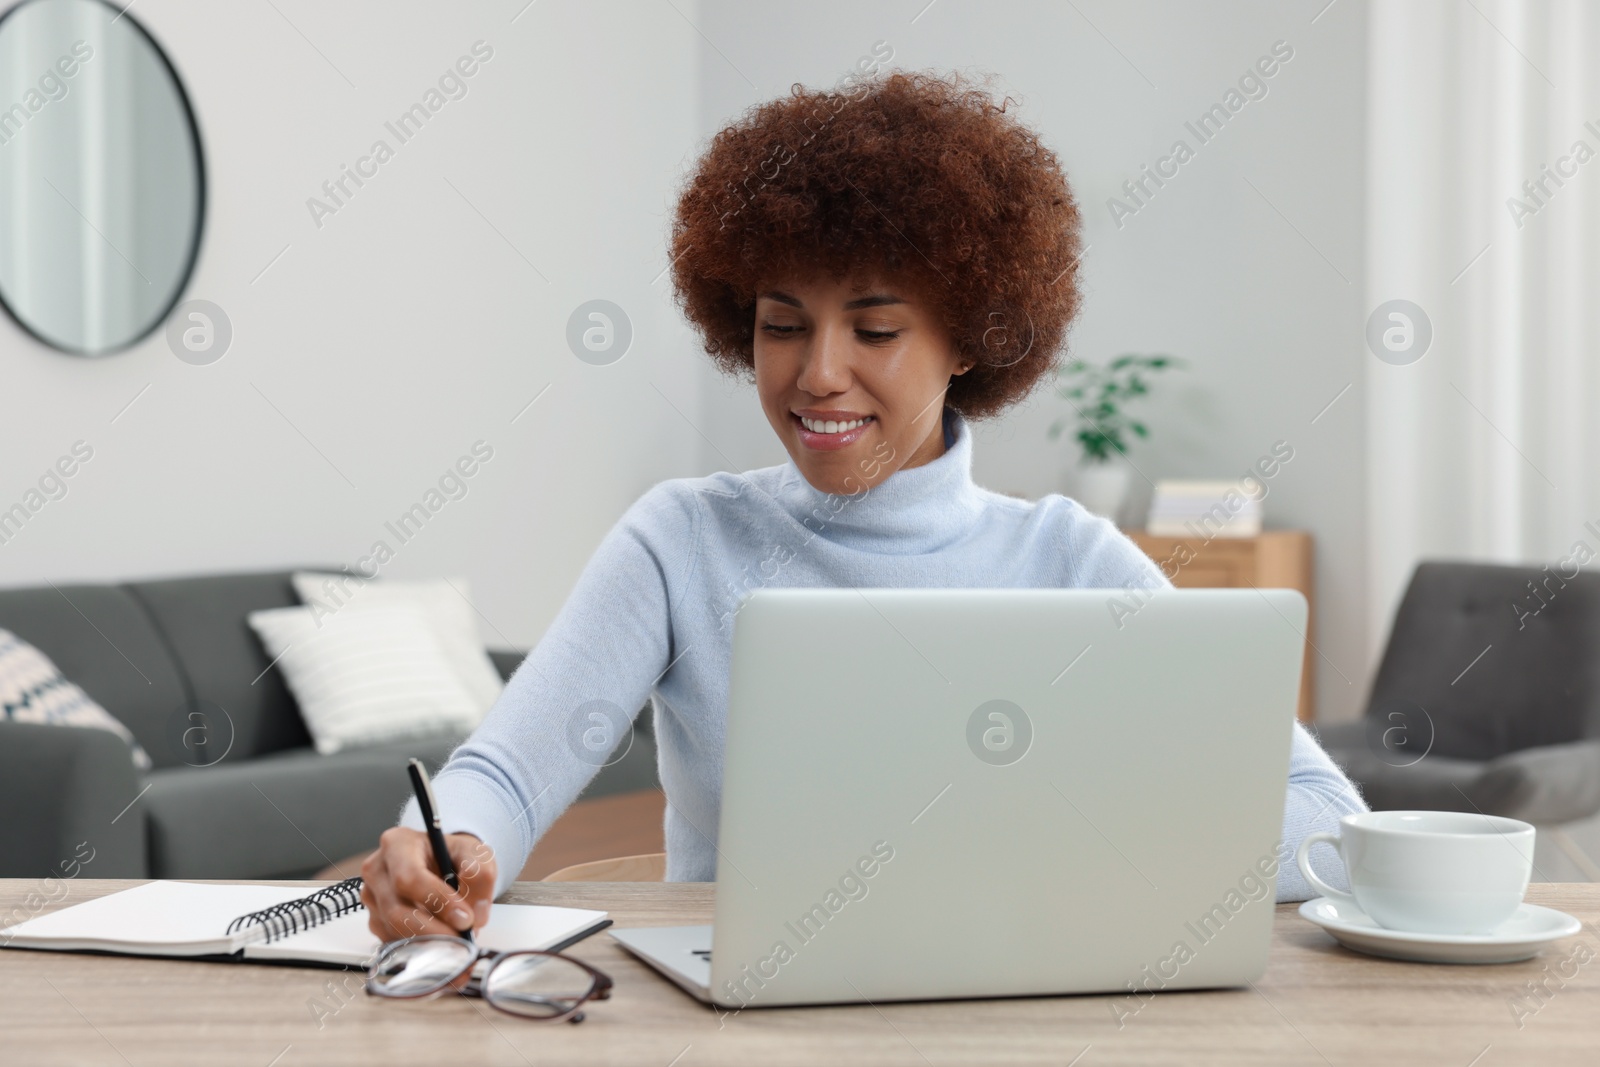 Photo of Beautiful young woman using laptop and writing in notebook at wooden desk in room